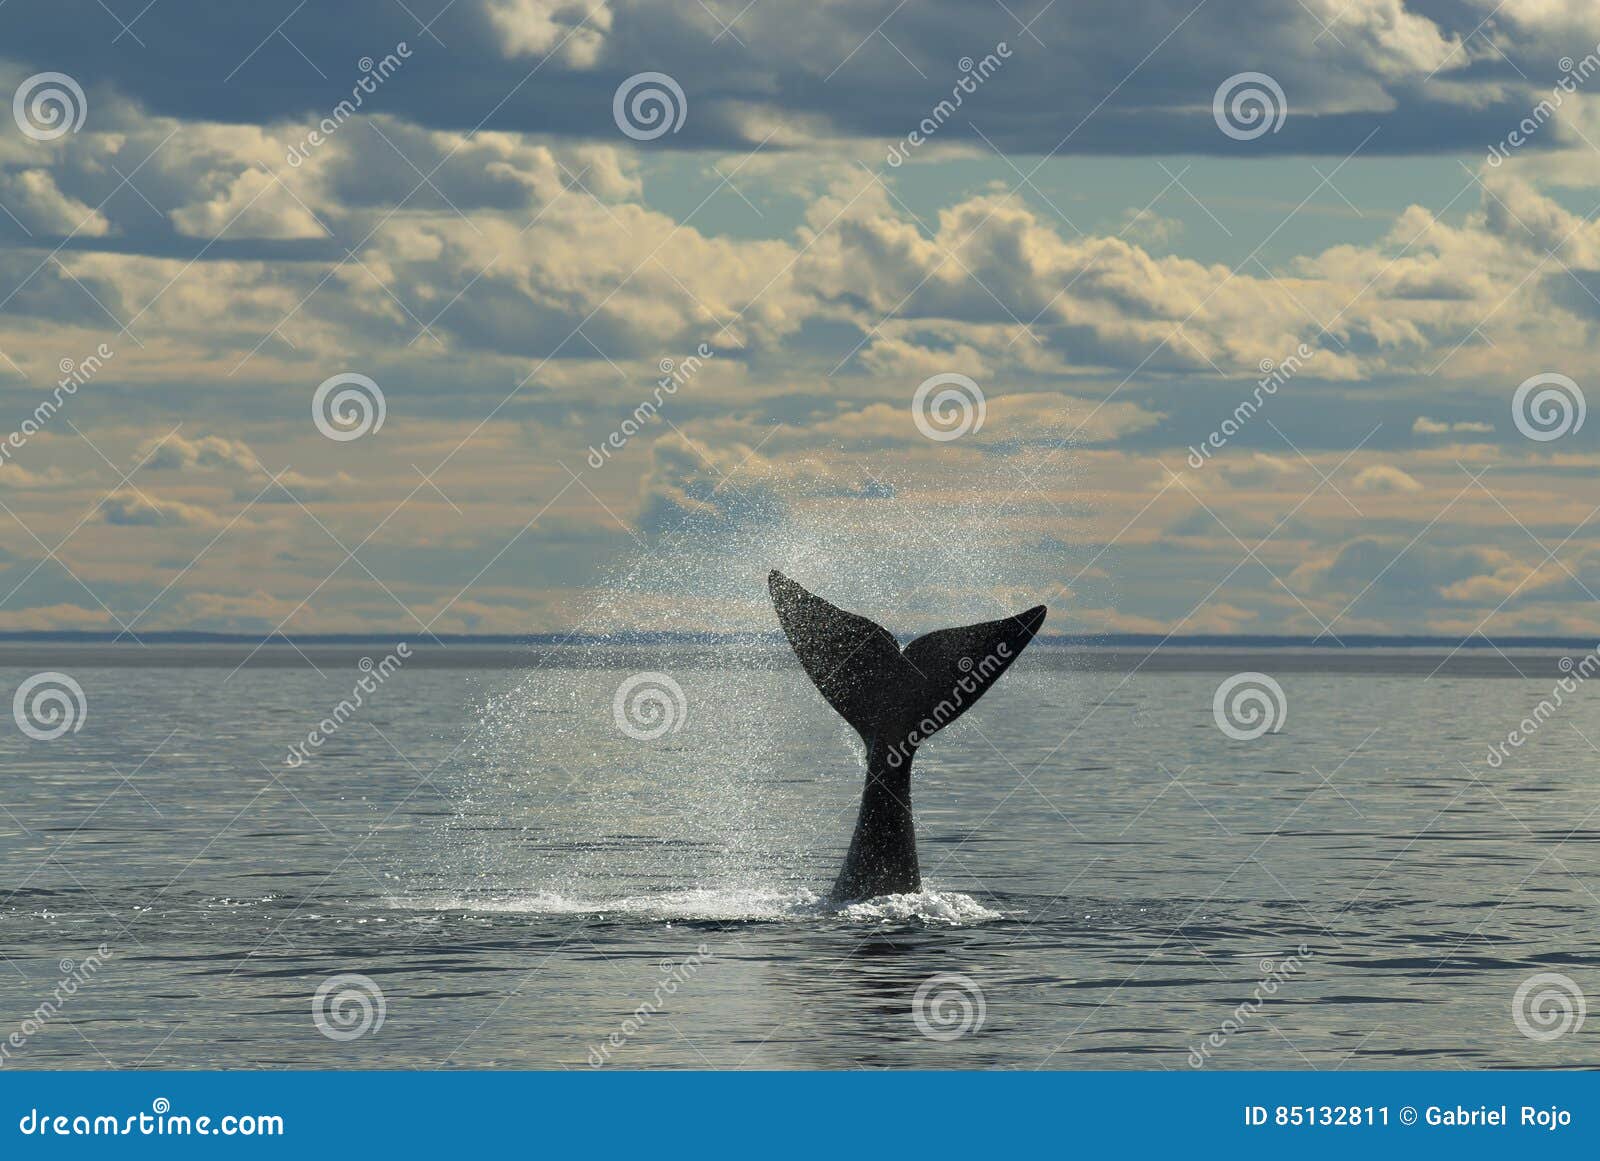 whale,patagonia argentina